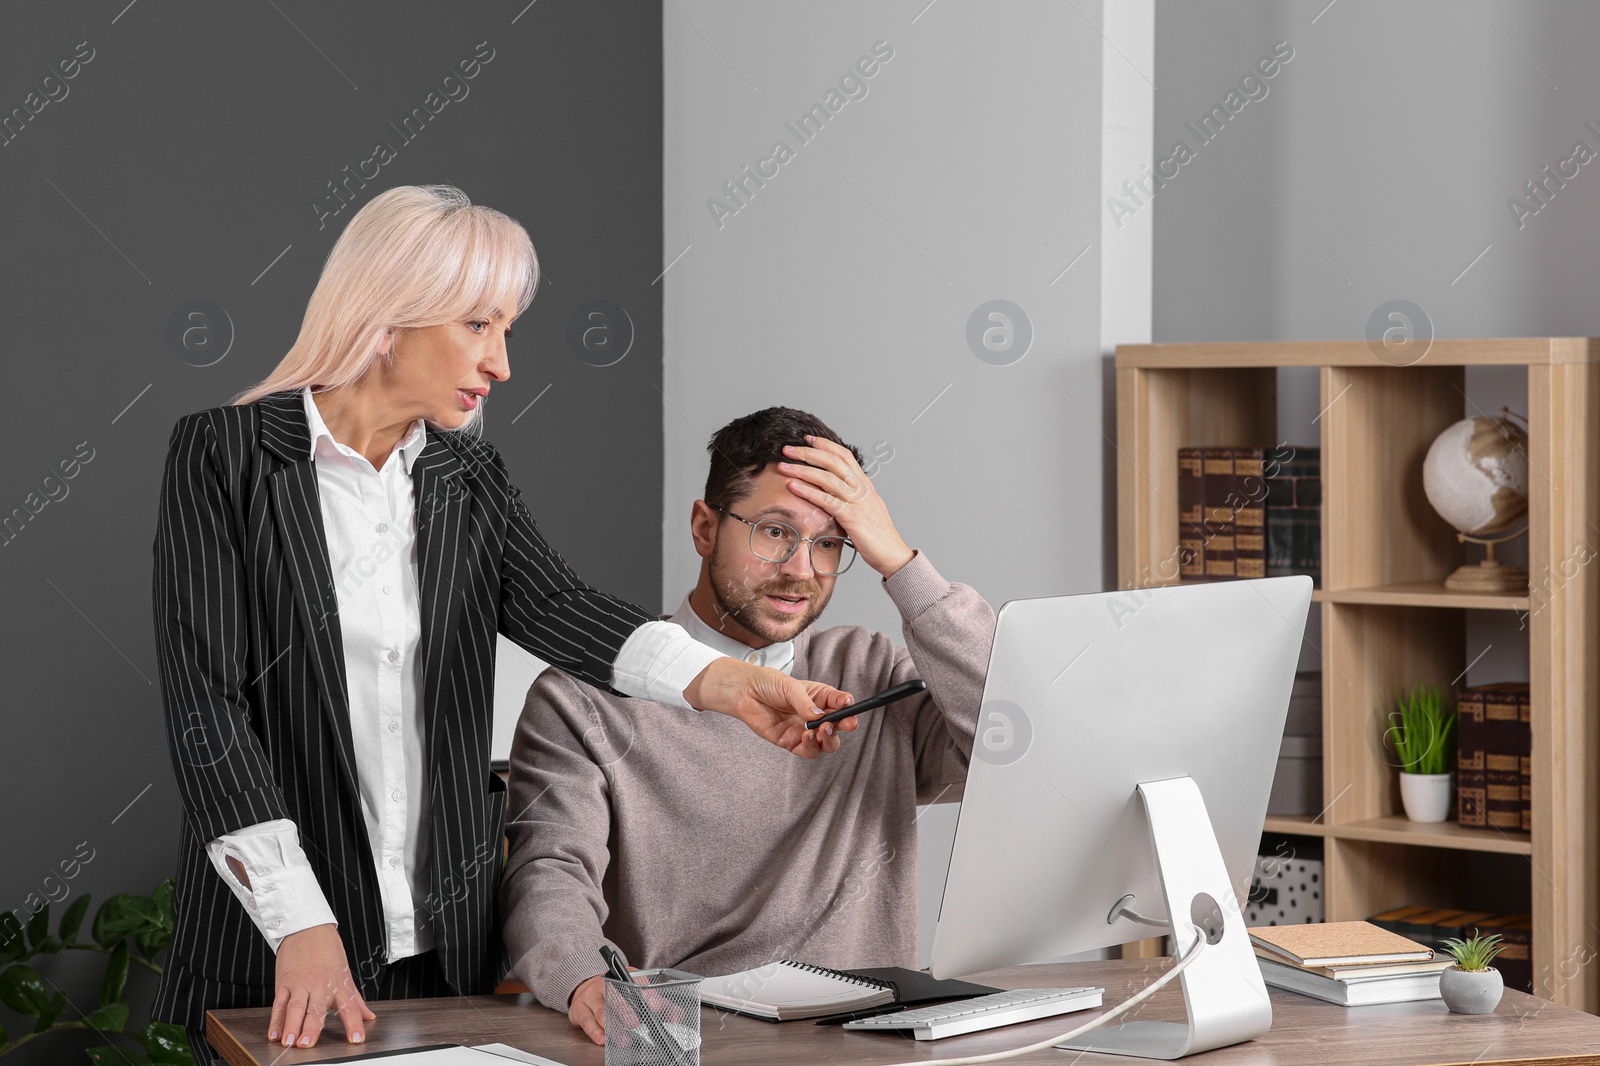 Photo of Confused employee and boss pointing at computer in office